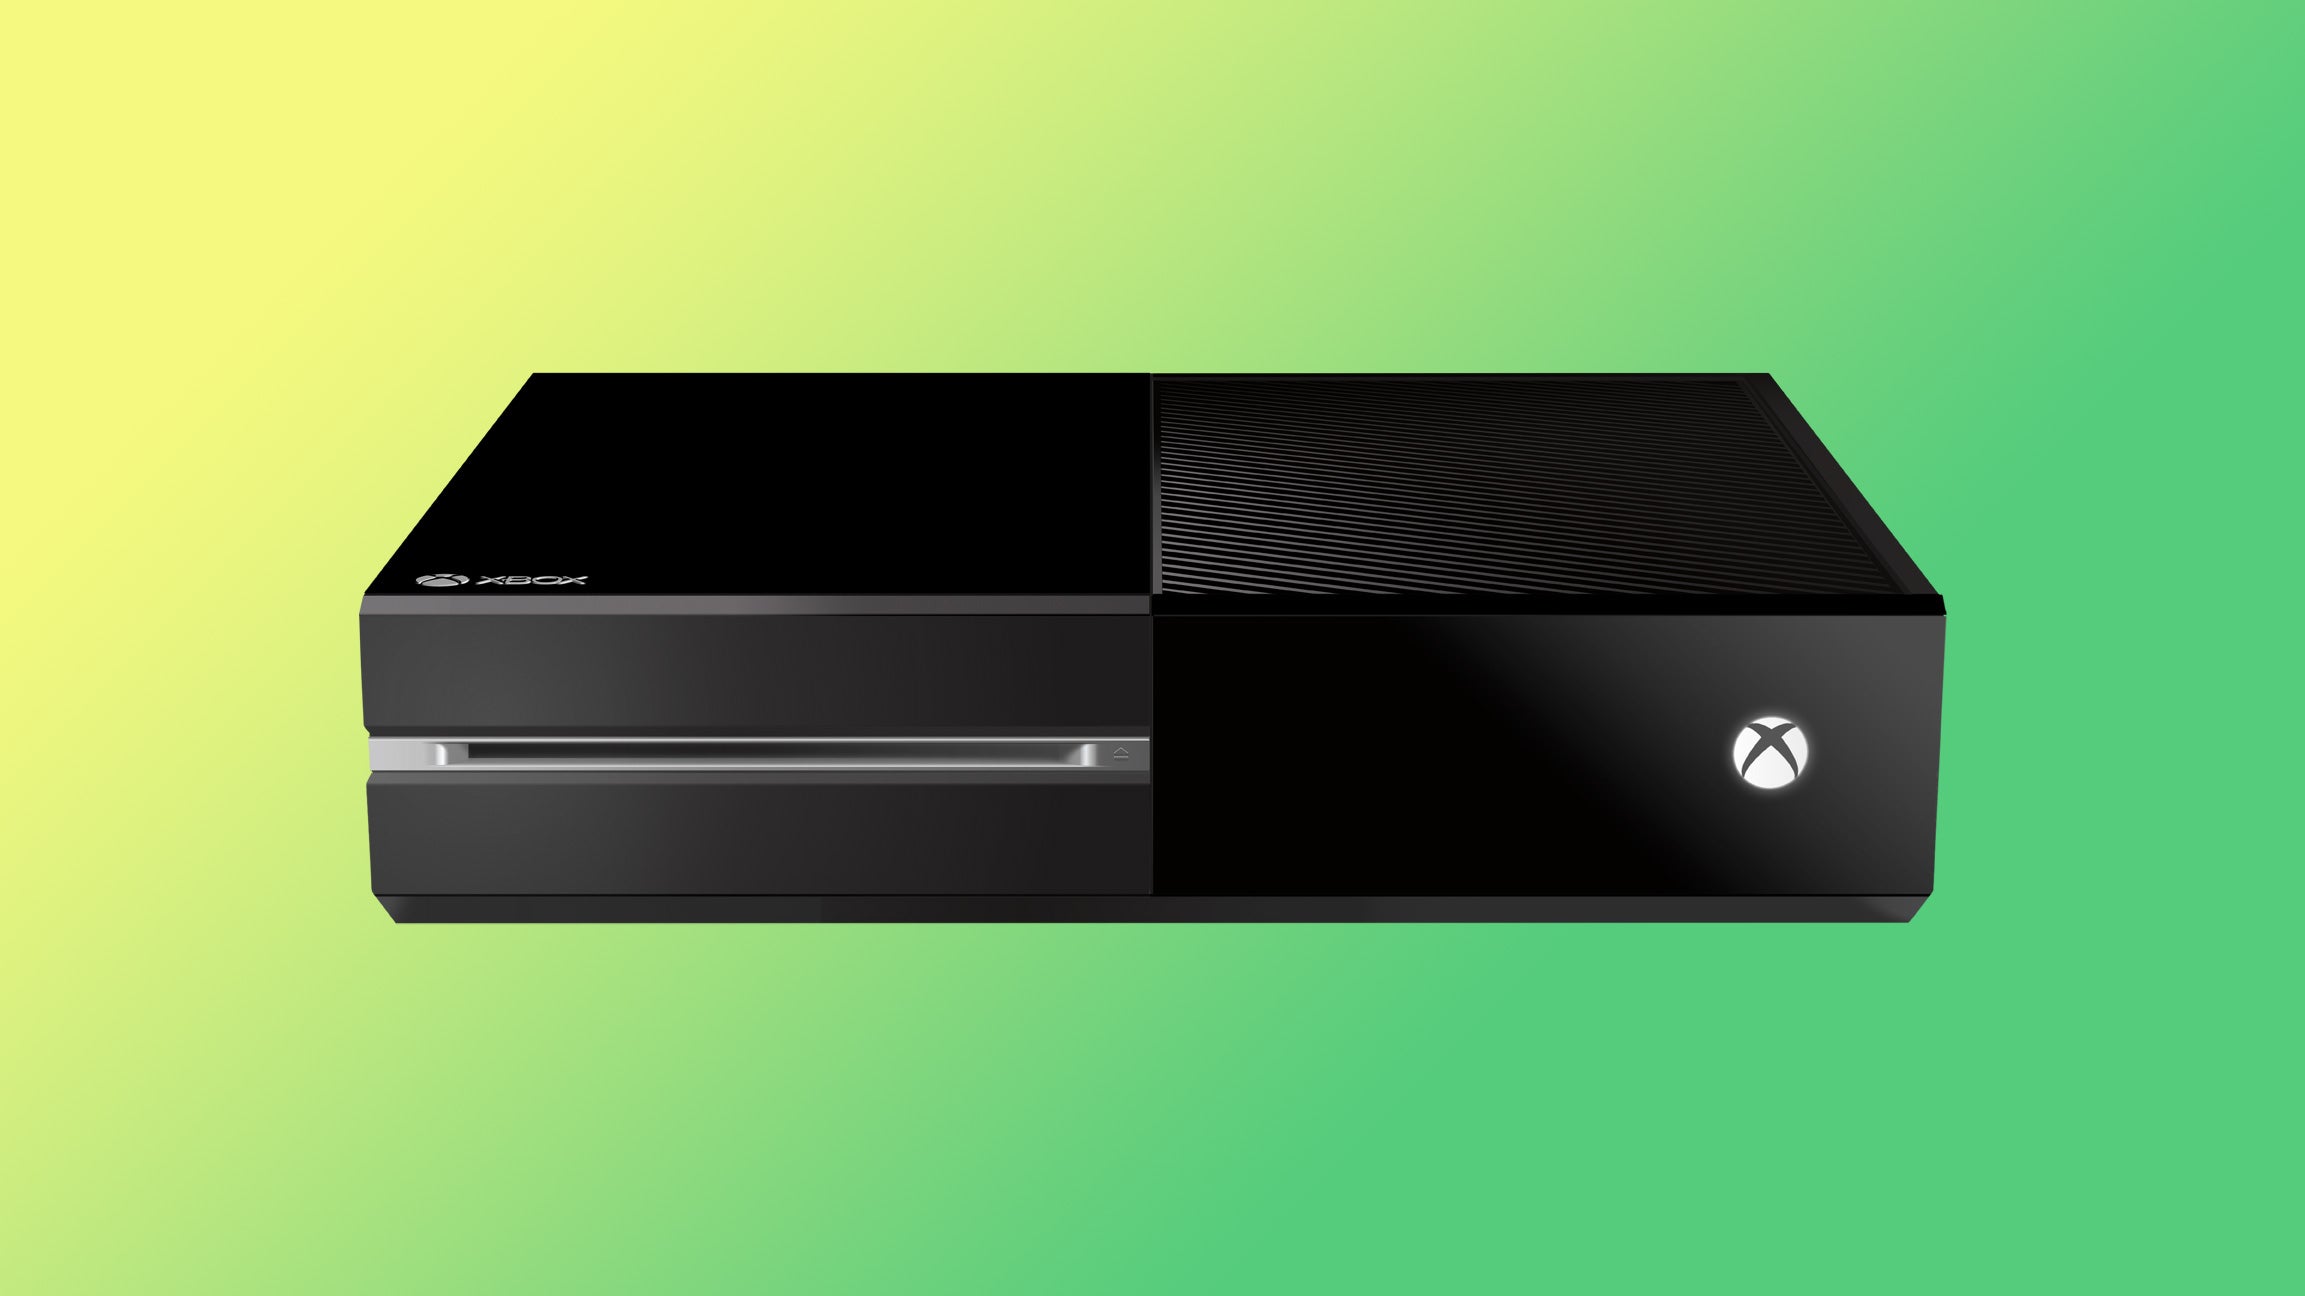 Image for PS4 sold "twice as many" units as Xbox One, new court papers show